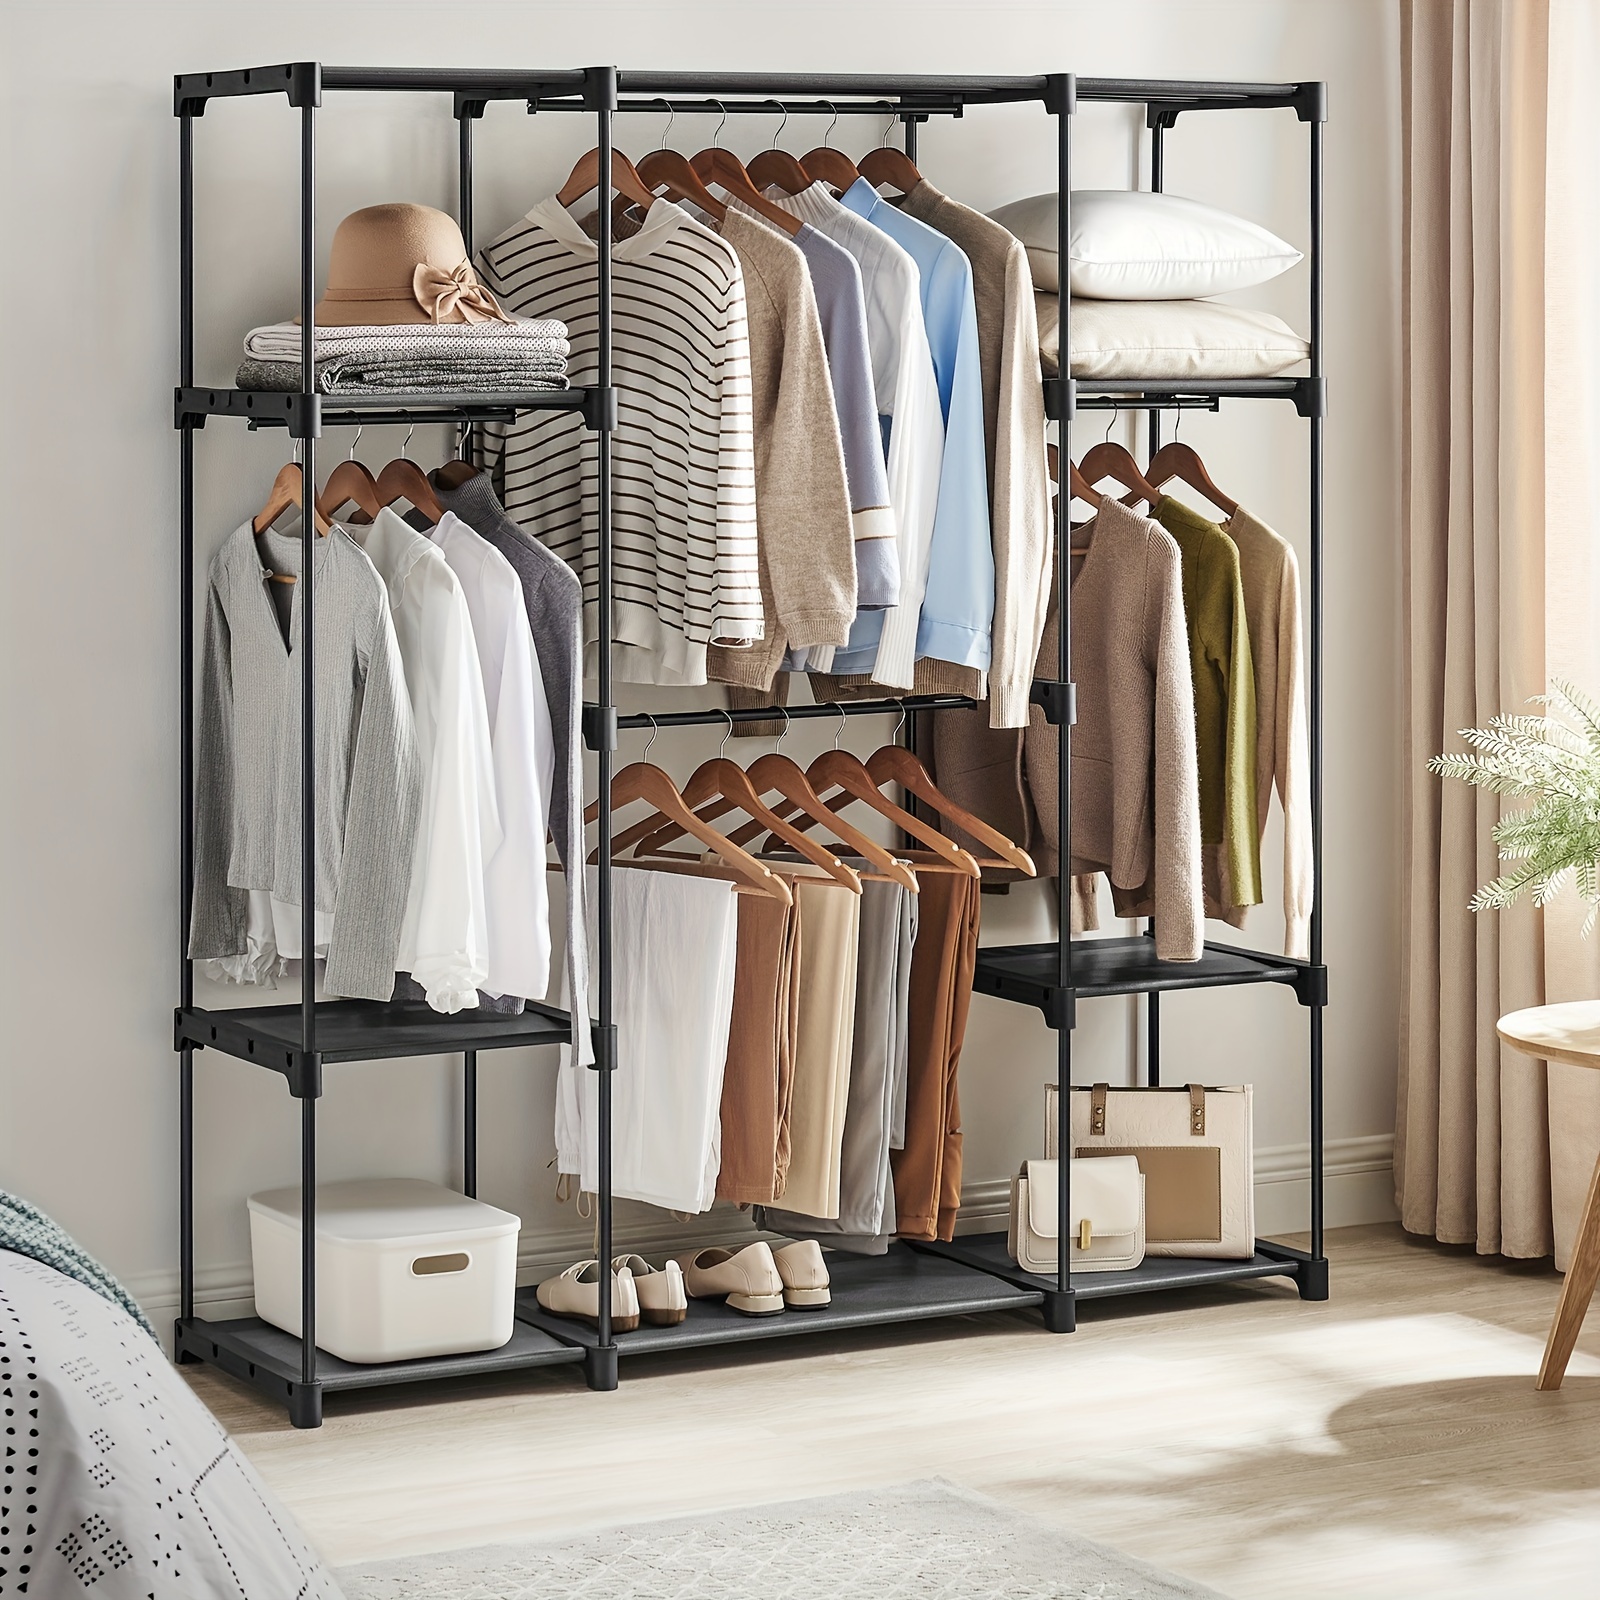 

Portable Closet, Freestanding Closet Organizer, Clothes Rack With Shelves, Hanging Rods, Storage Organizer, For Cloakroom, Bedroom, 59.5 X 16.9 X 65.4 Inches, Black